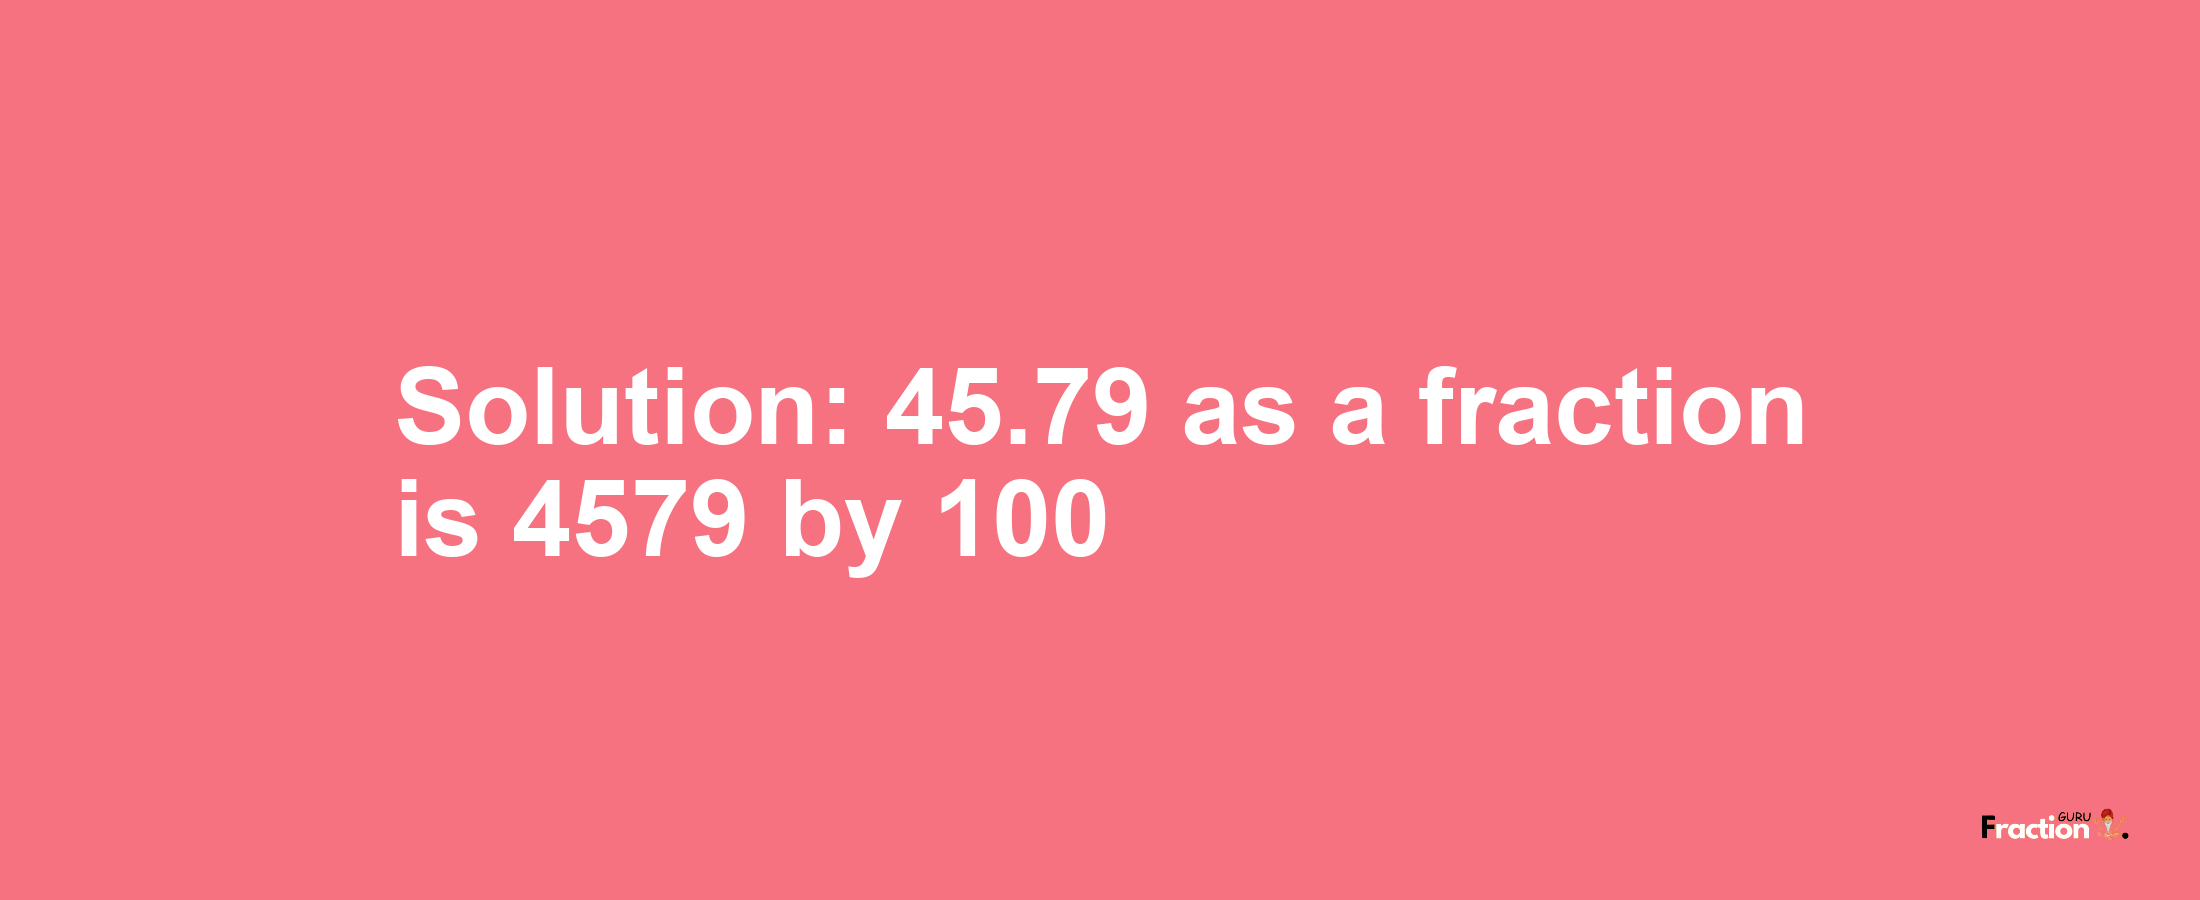 Solution:45.79 as a fraction is 4579/100